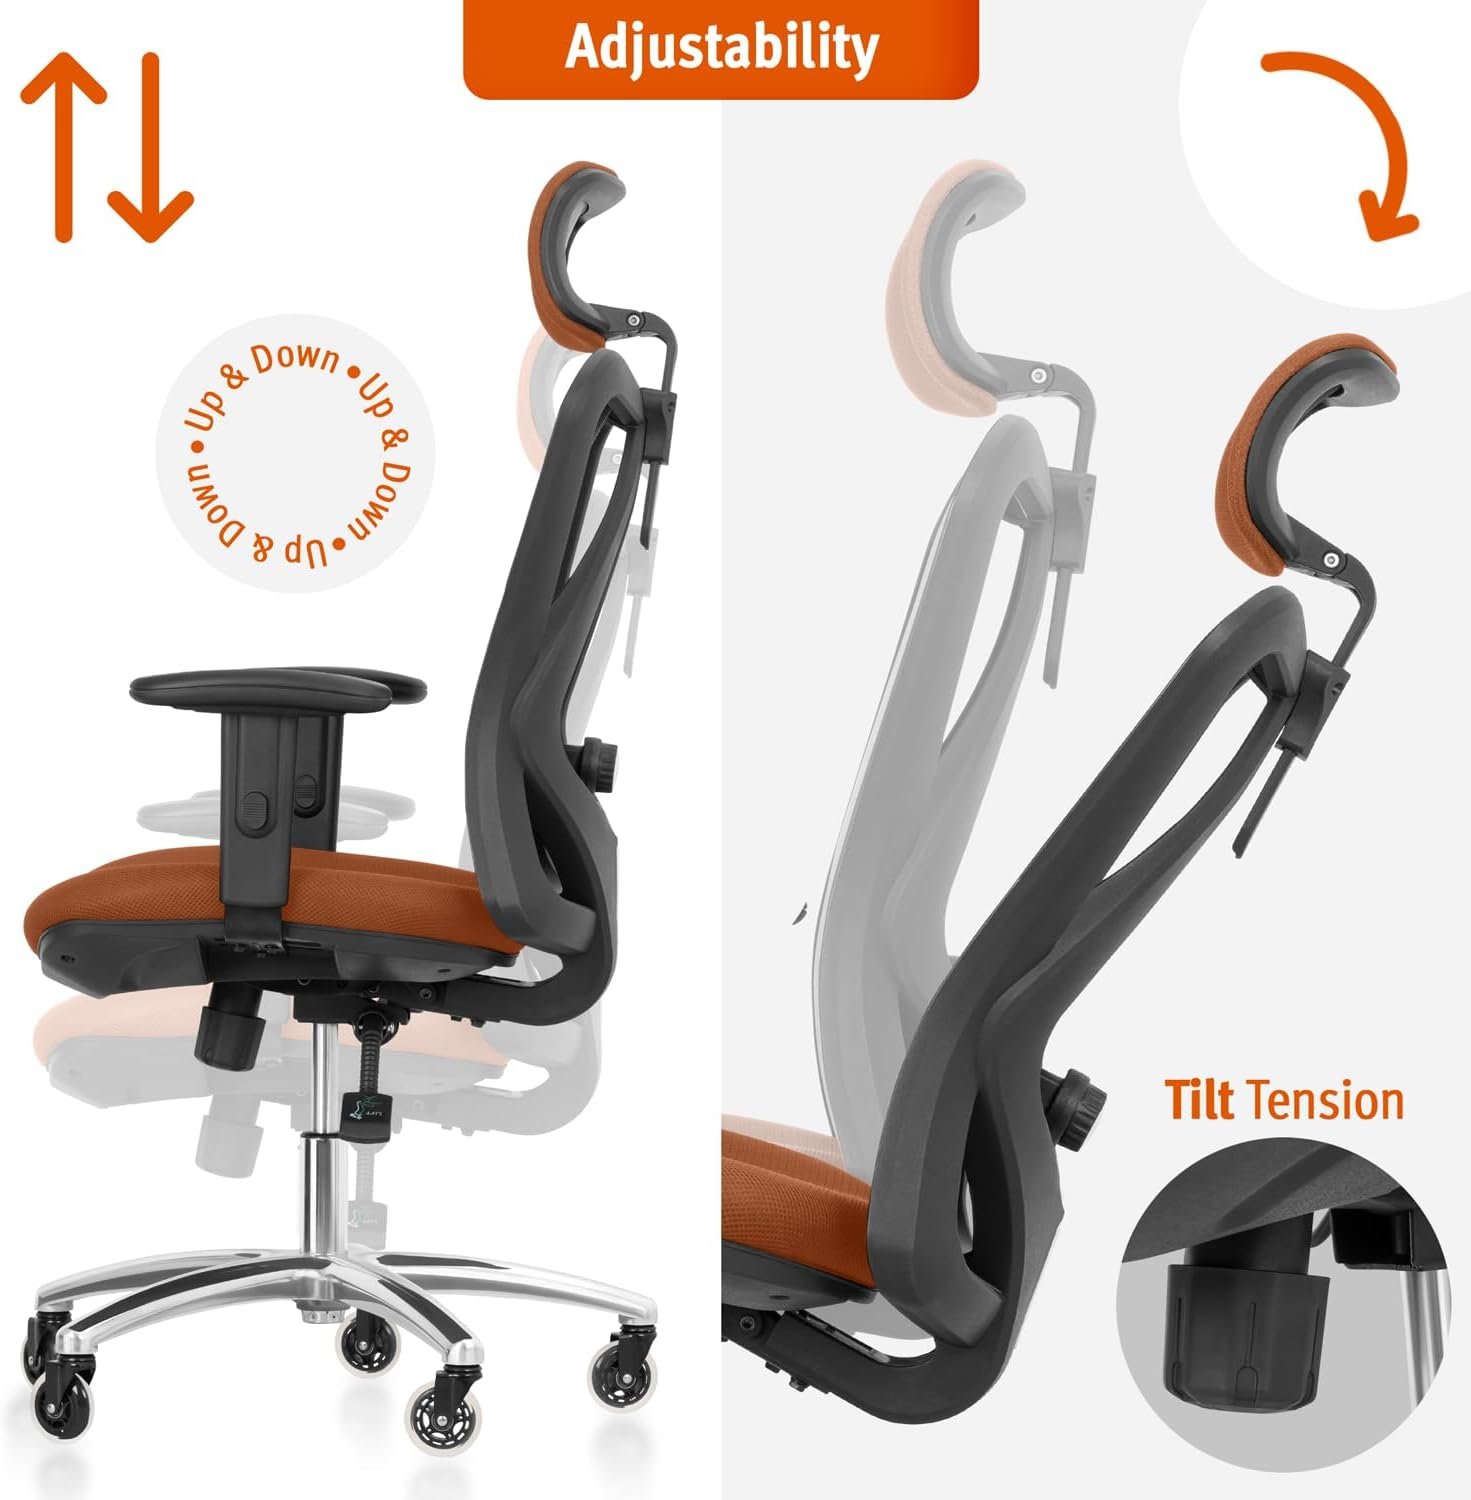 Duramont Ergonomic Office Chair - Adjustable Desk Chair with Lumbar Support and Rollerblade Wheels - High Back Chairs with Breathable Mesh - Thick Seat Cushion, Head, and Arm Rests - Reclines